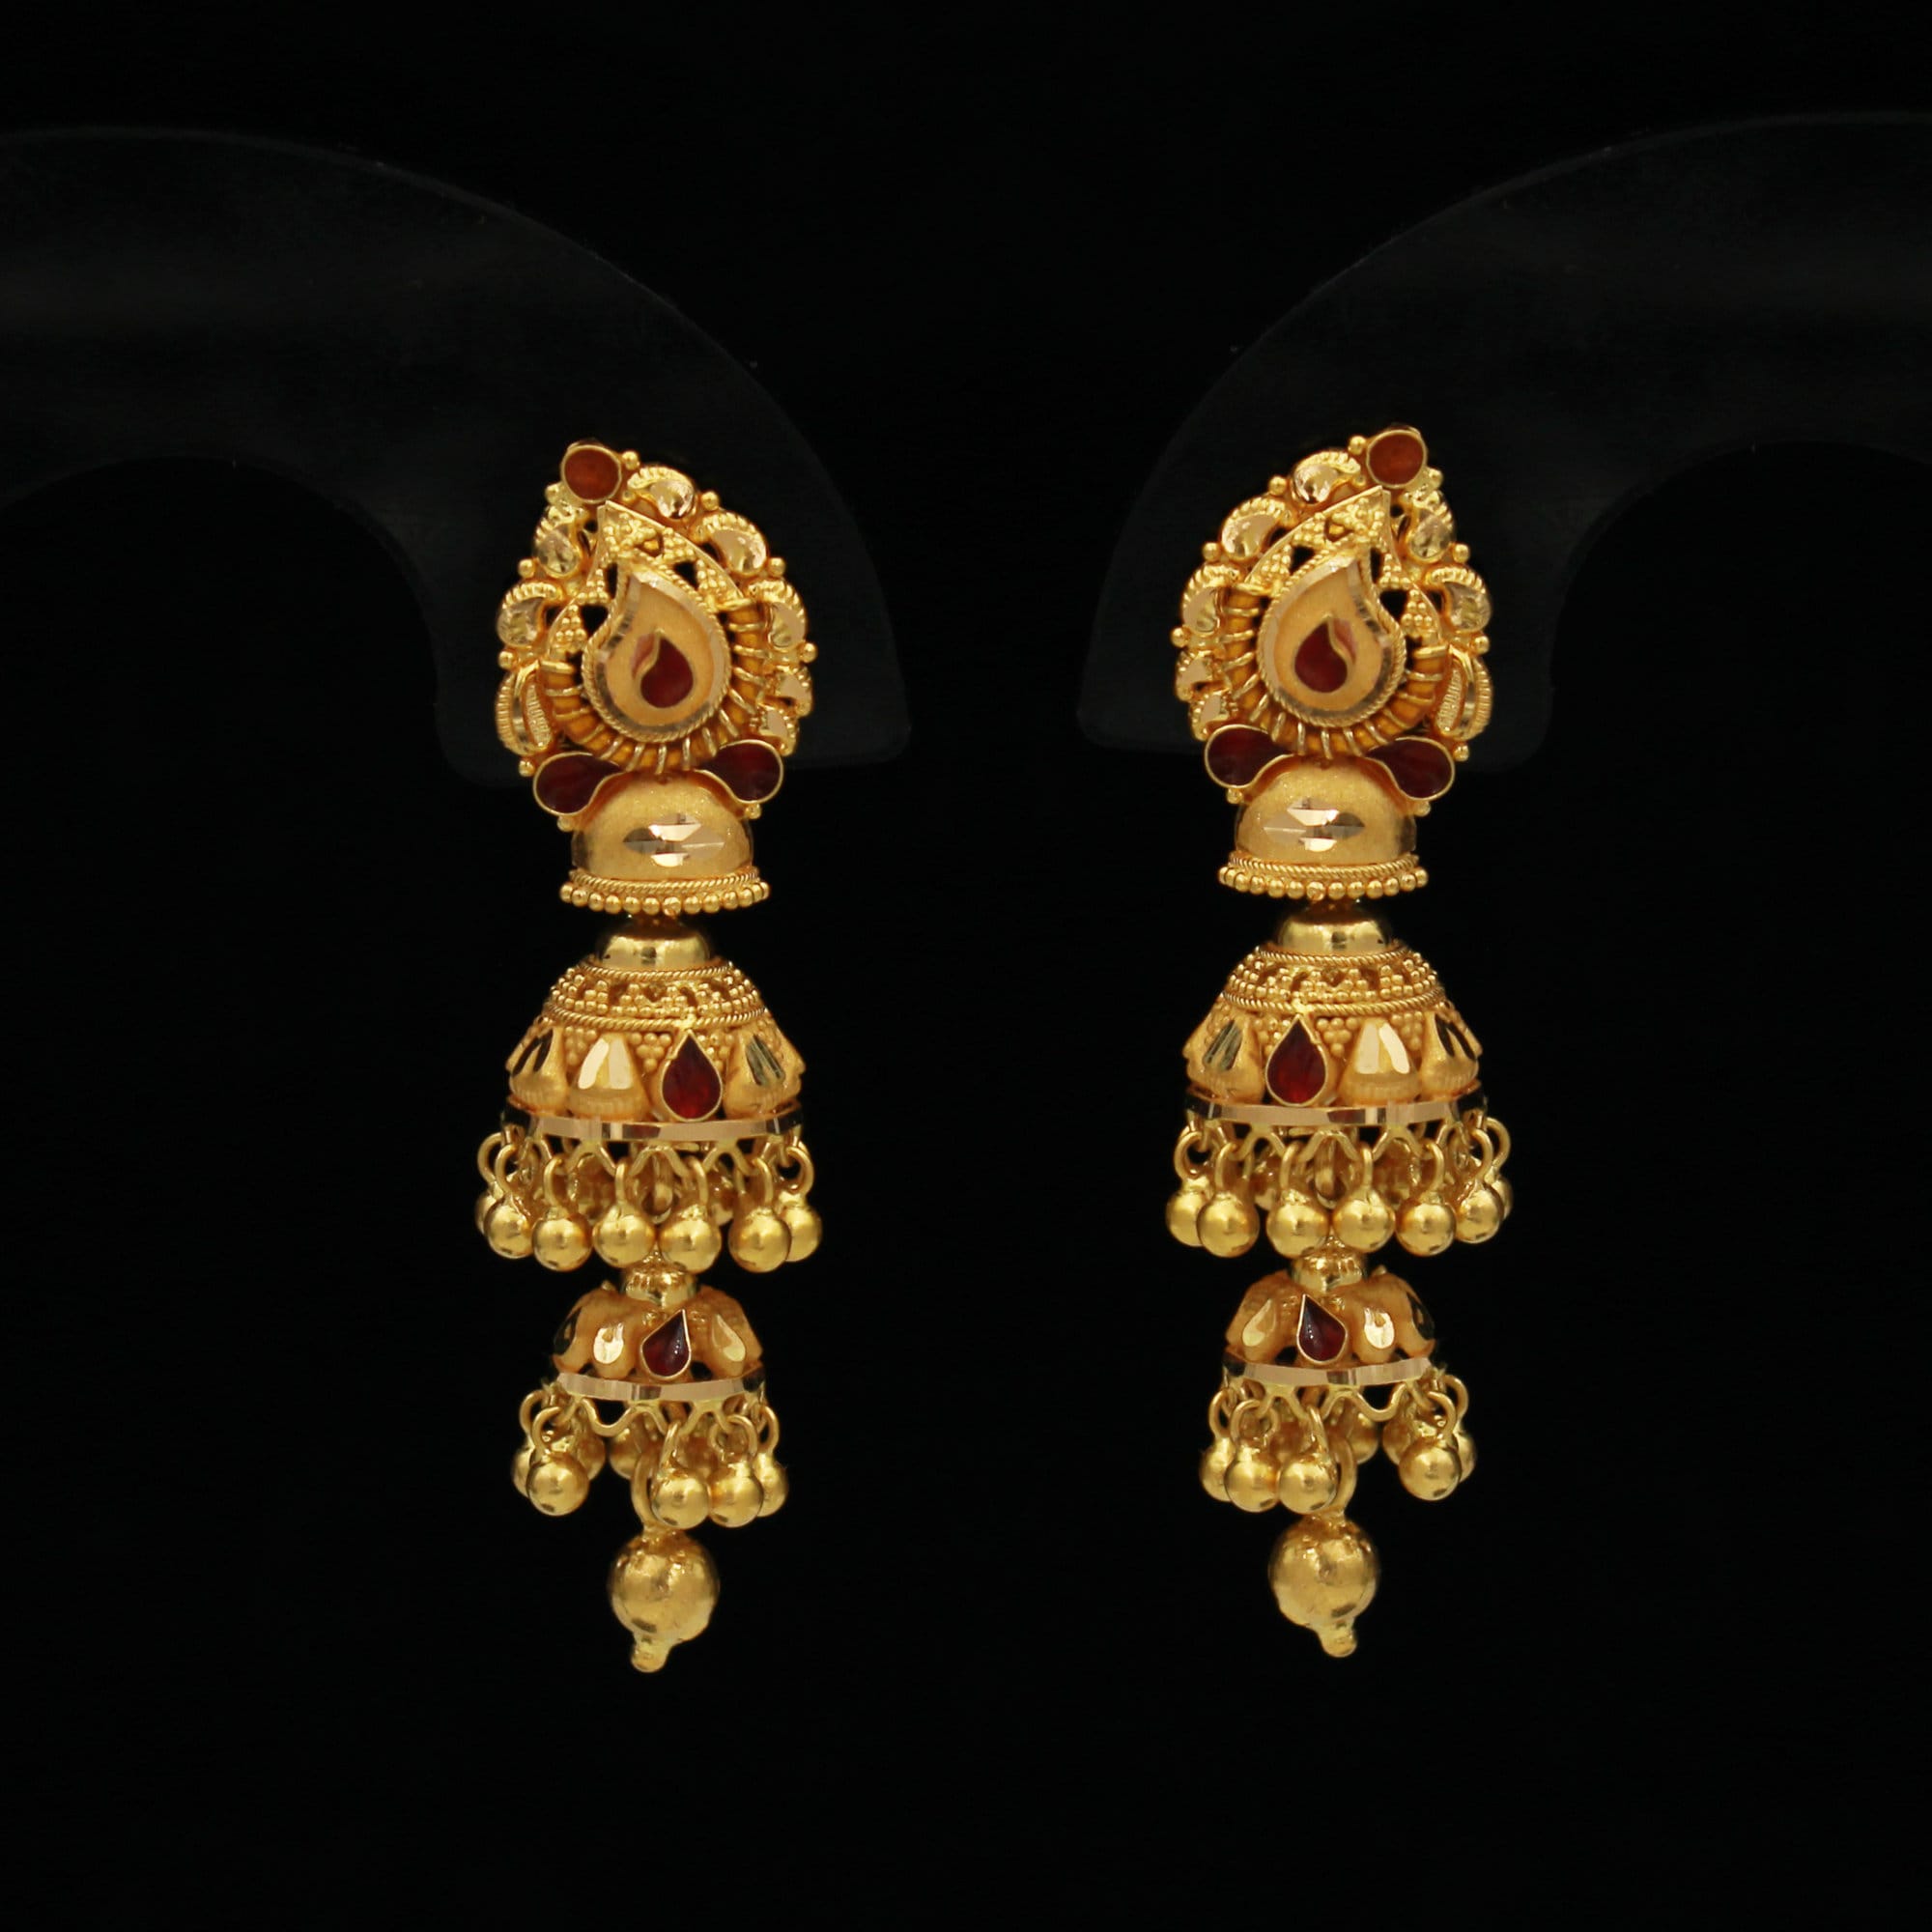 22 kt Gold Full Ear Jhumka Earrings - AjEr65941 - US$ 3,072 - 22 kt gold  exclusive designer earrings, covers the whole ear with double layered jhumki  hanging. The